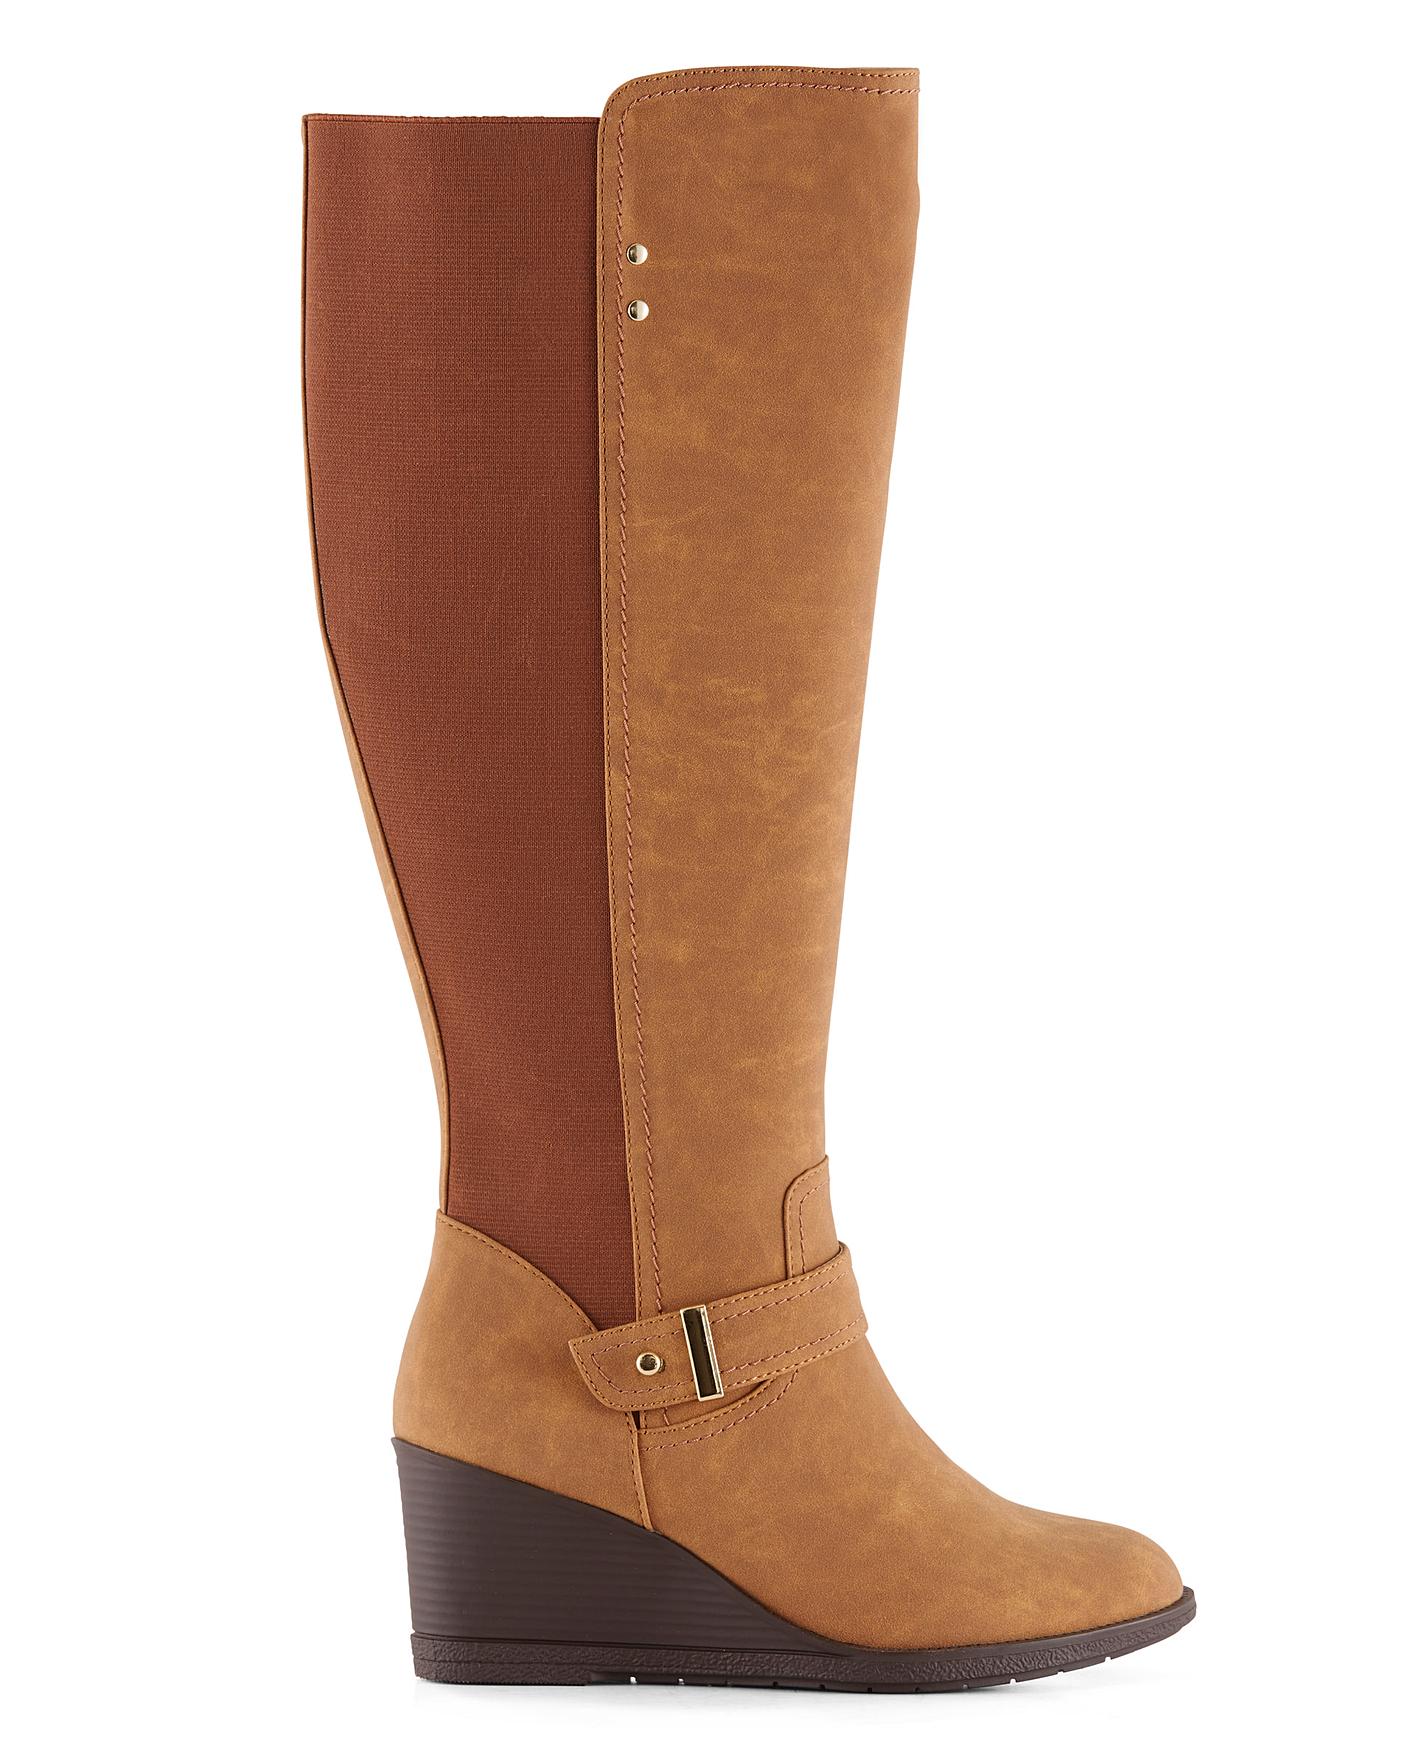 Cicely Boots Wide Fit Super Curvy Calf 